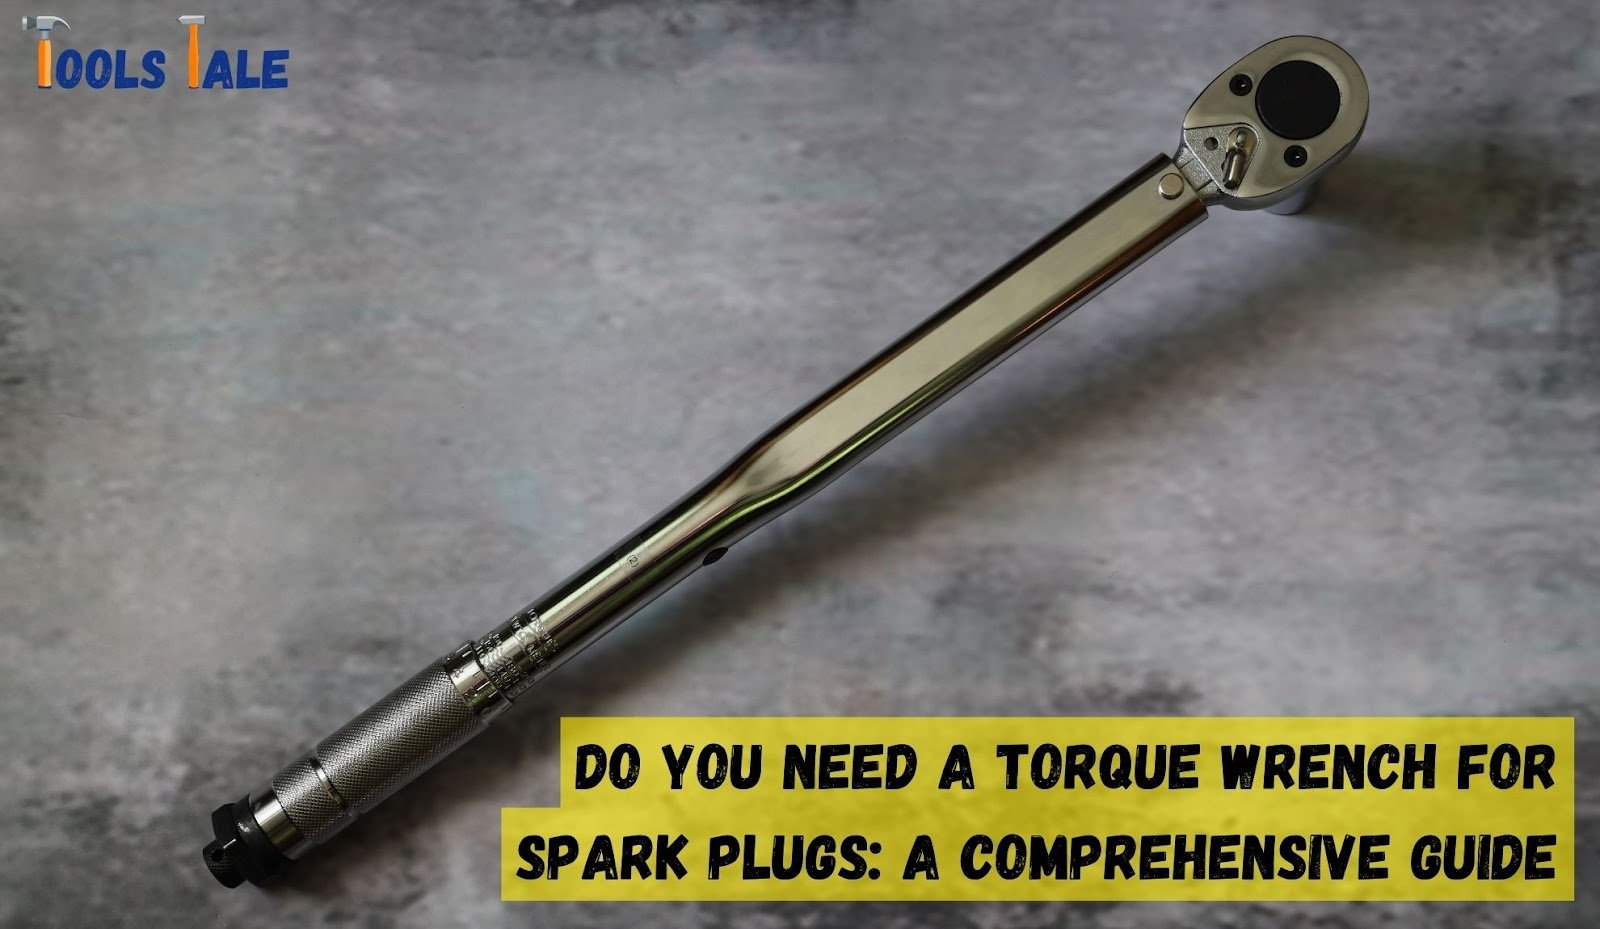 Do you need a torque wrench for spark plugs